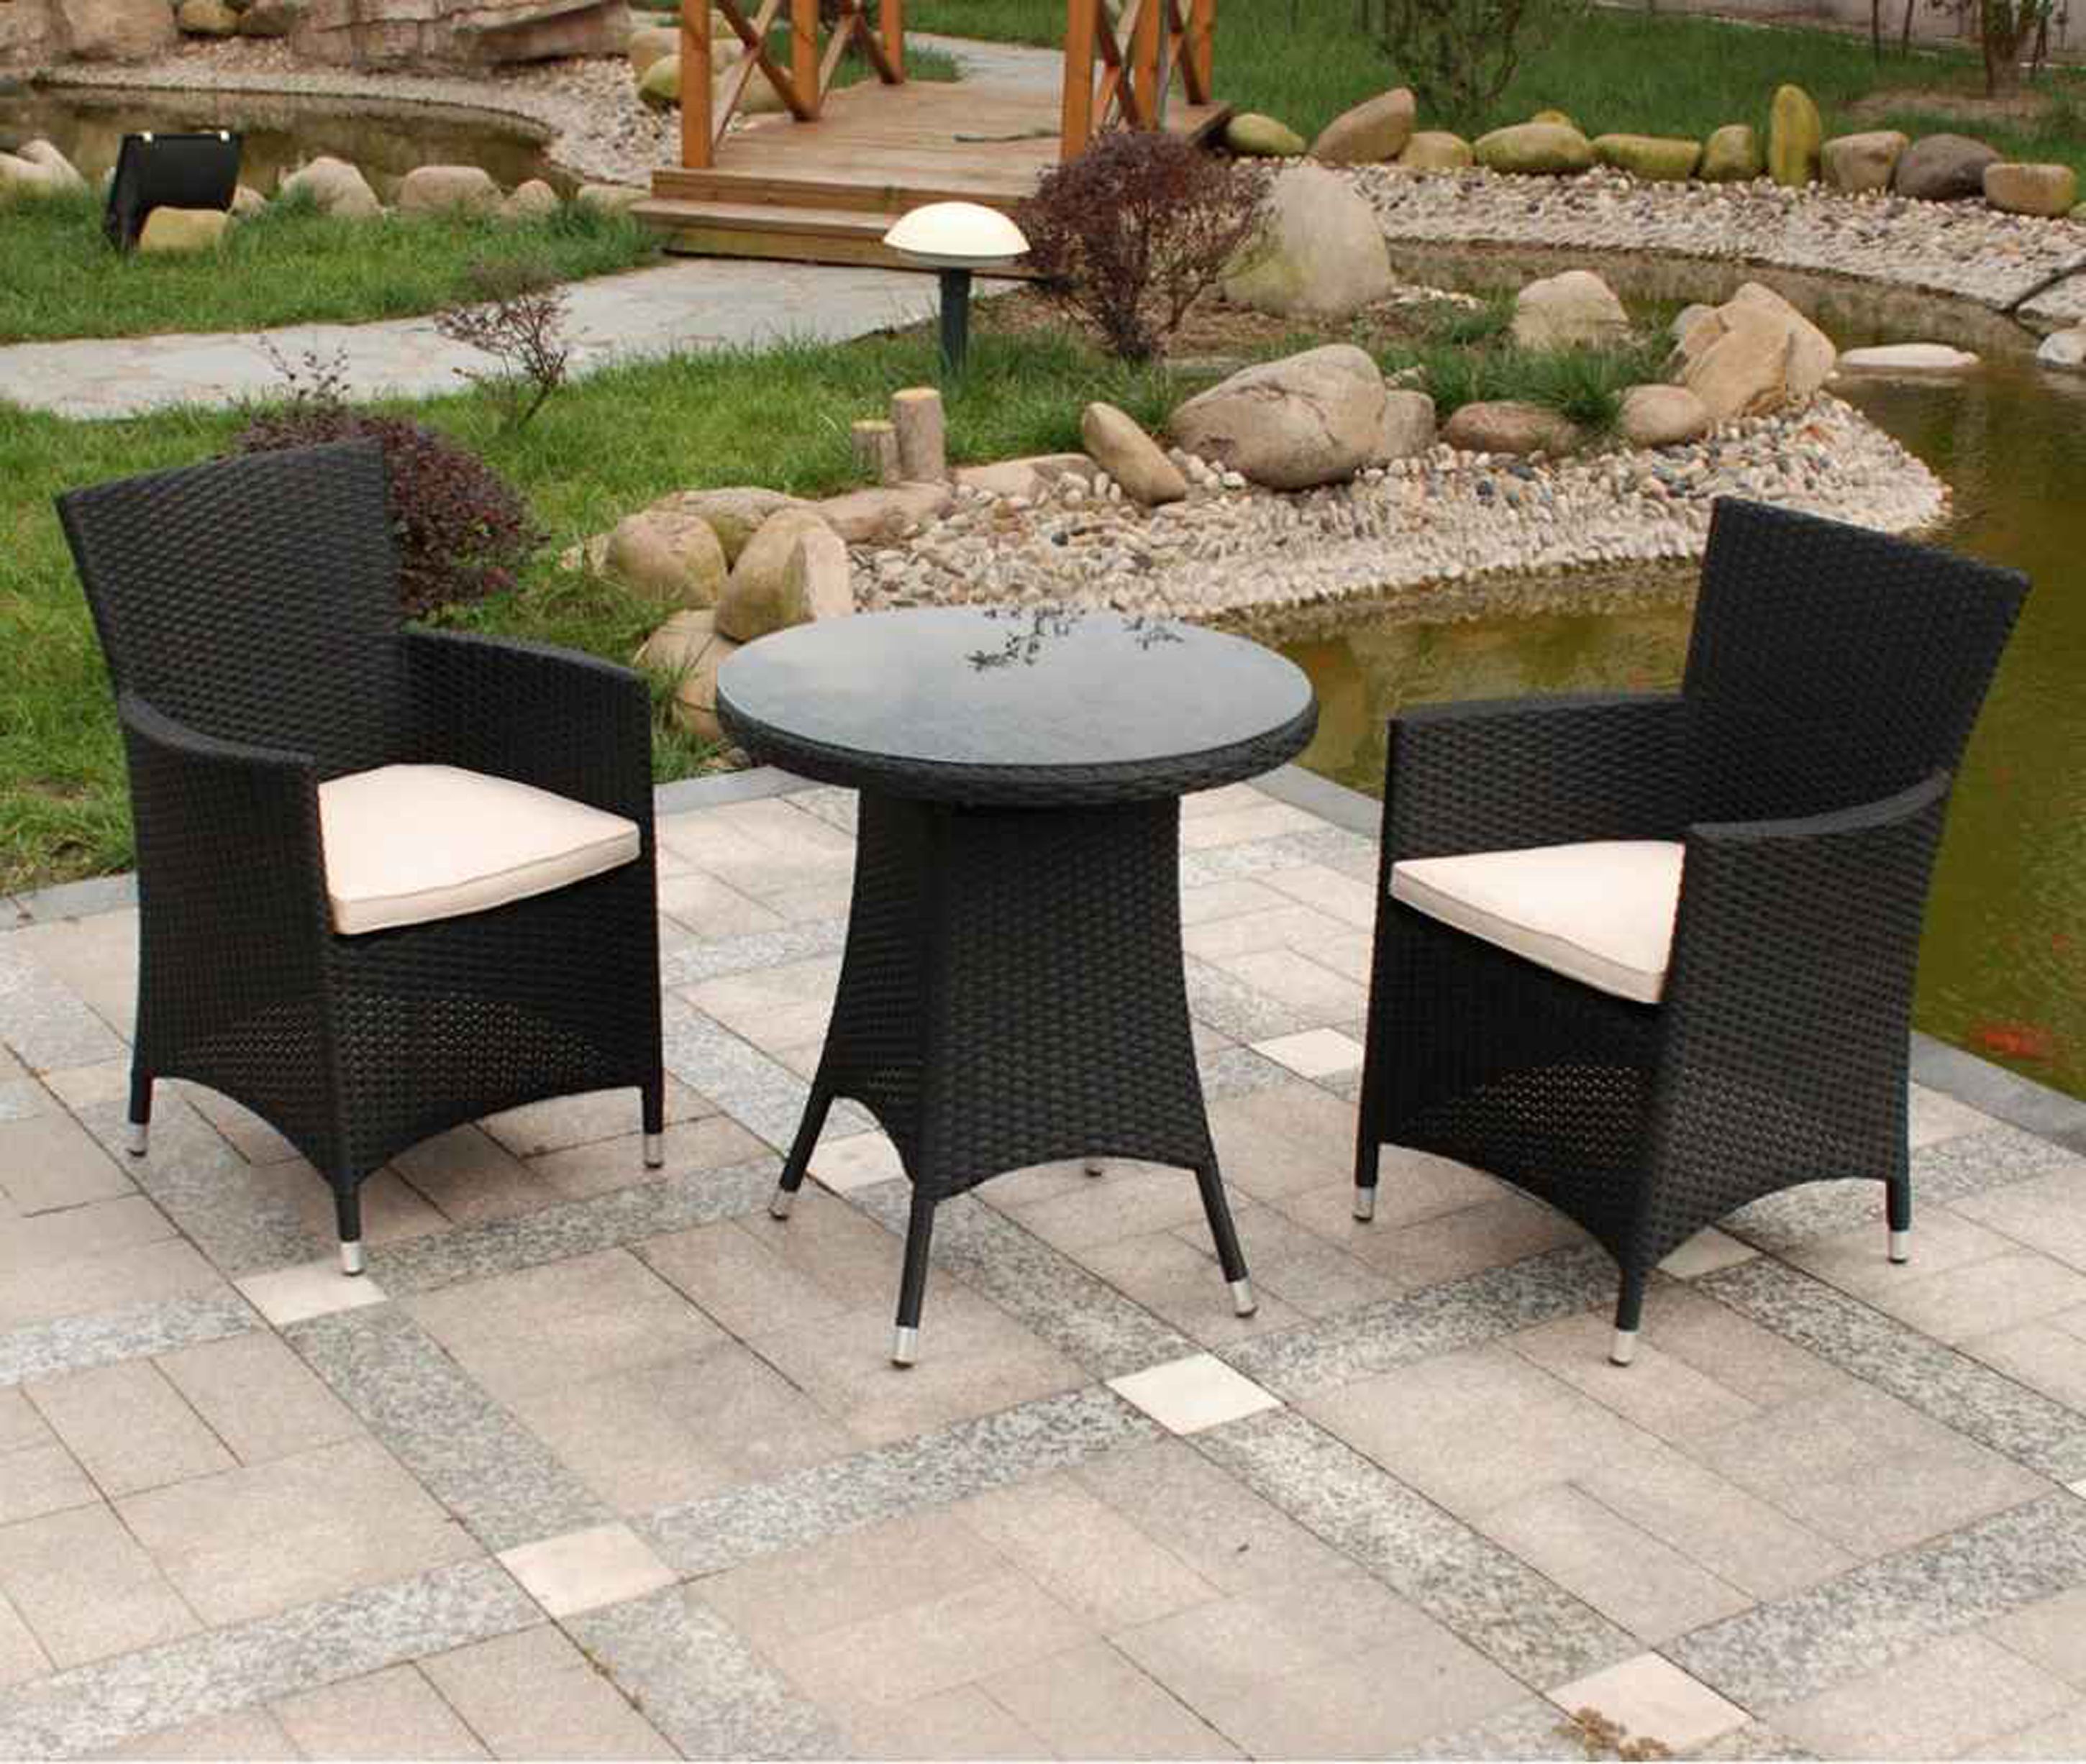 Amazing Outdoor Modern Wicker Idea With Black Wicker Armchairs With White Seat Cushions And Round Black Coffee Table With Wicker Base Amazing Outdoor Modern Wicker Furniture (View 28 of 28)